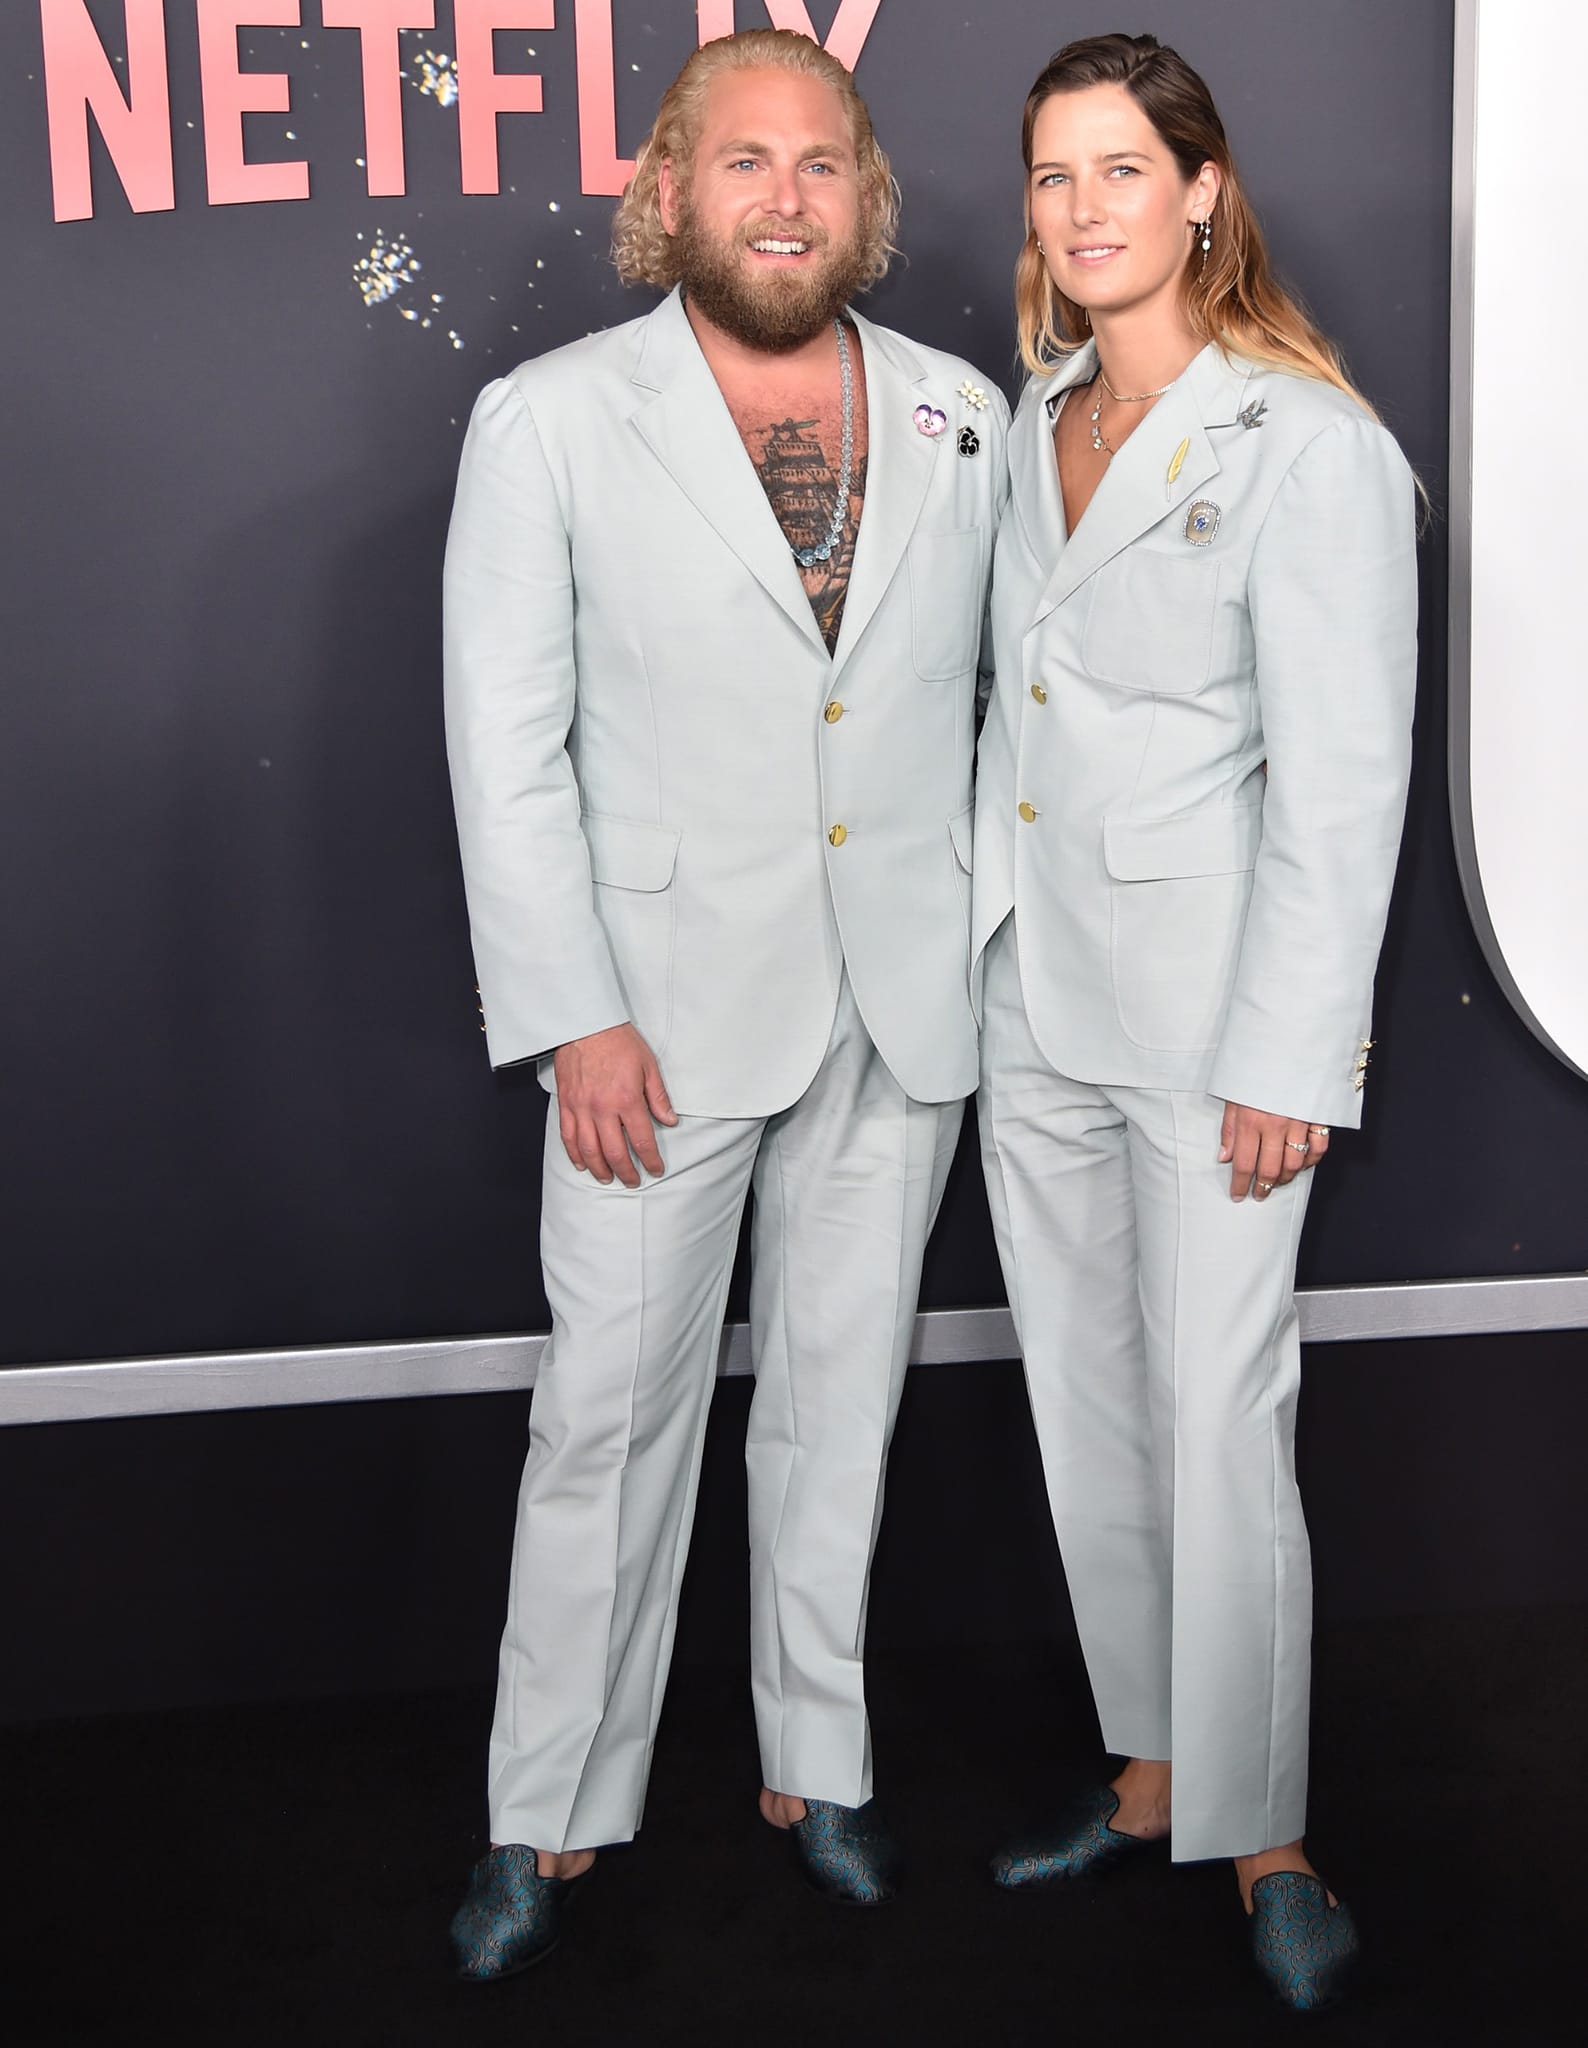 Jonah Hill and his surf instructor girlfriend Sarah Brady at the Netflix premiere of Don't Look Up on December 5, 2021